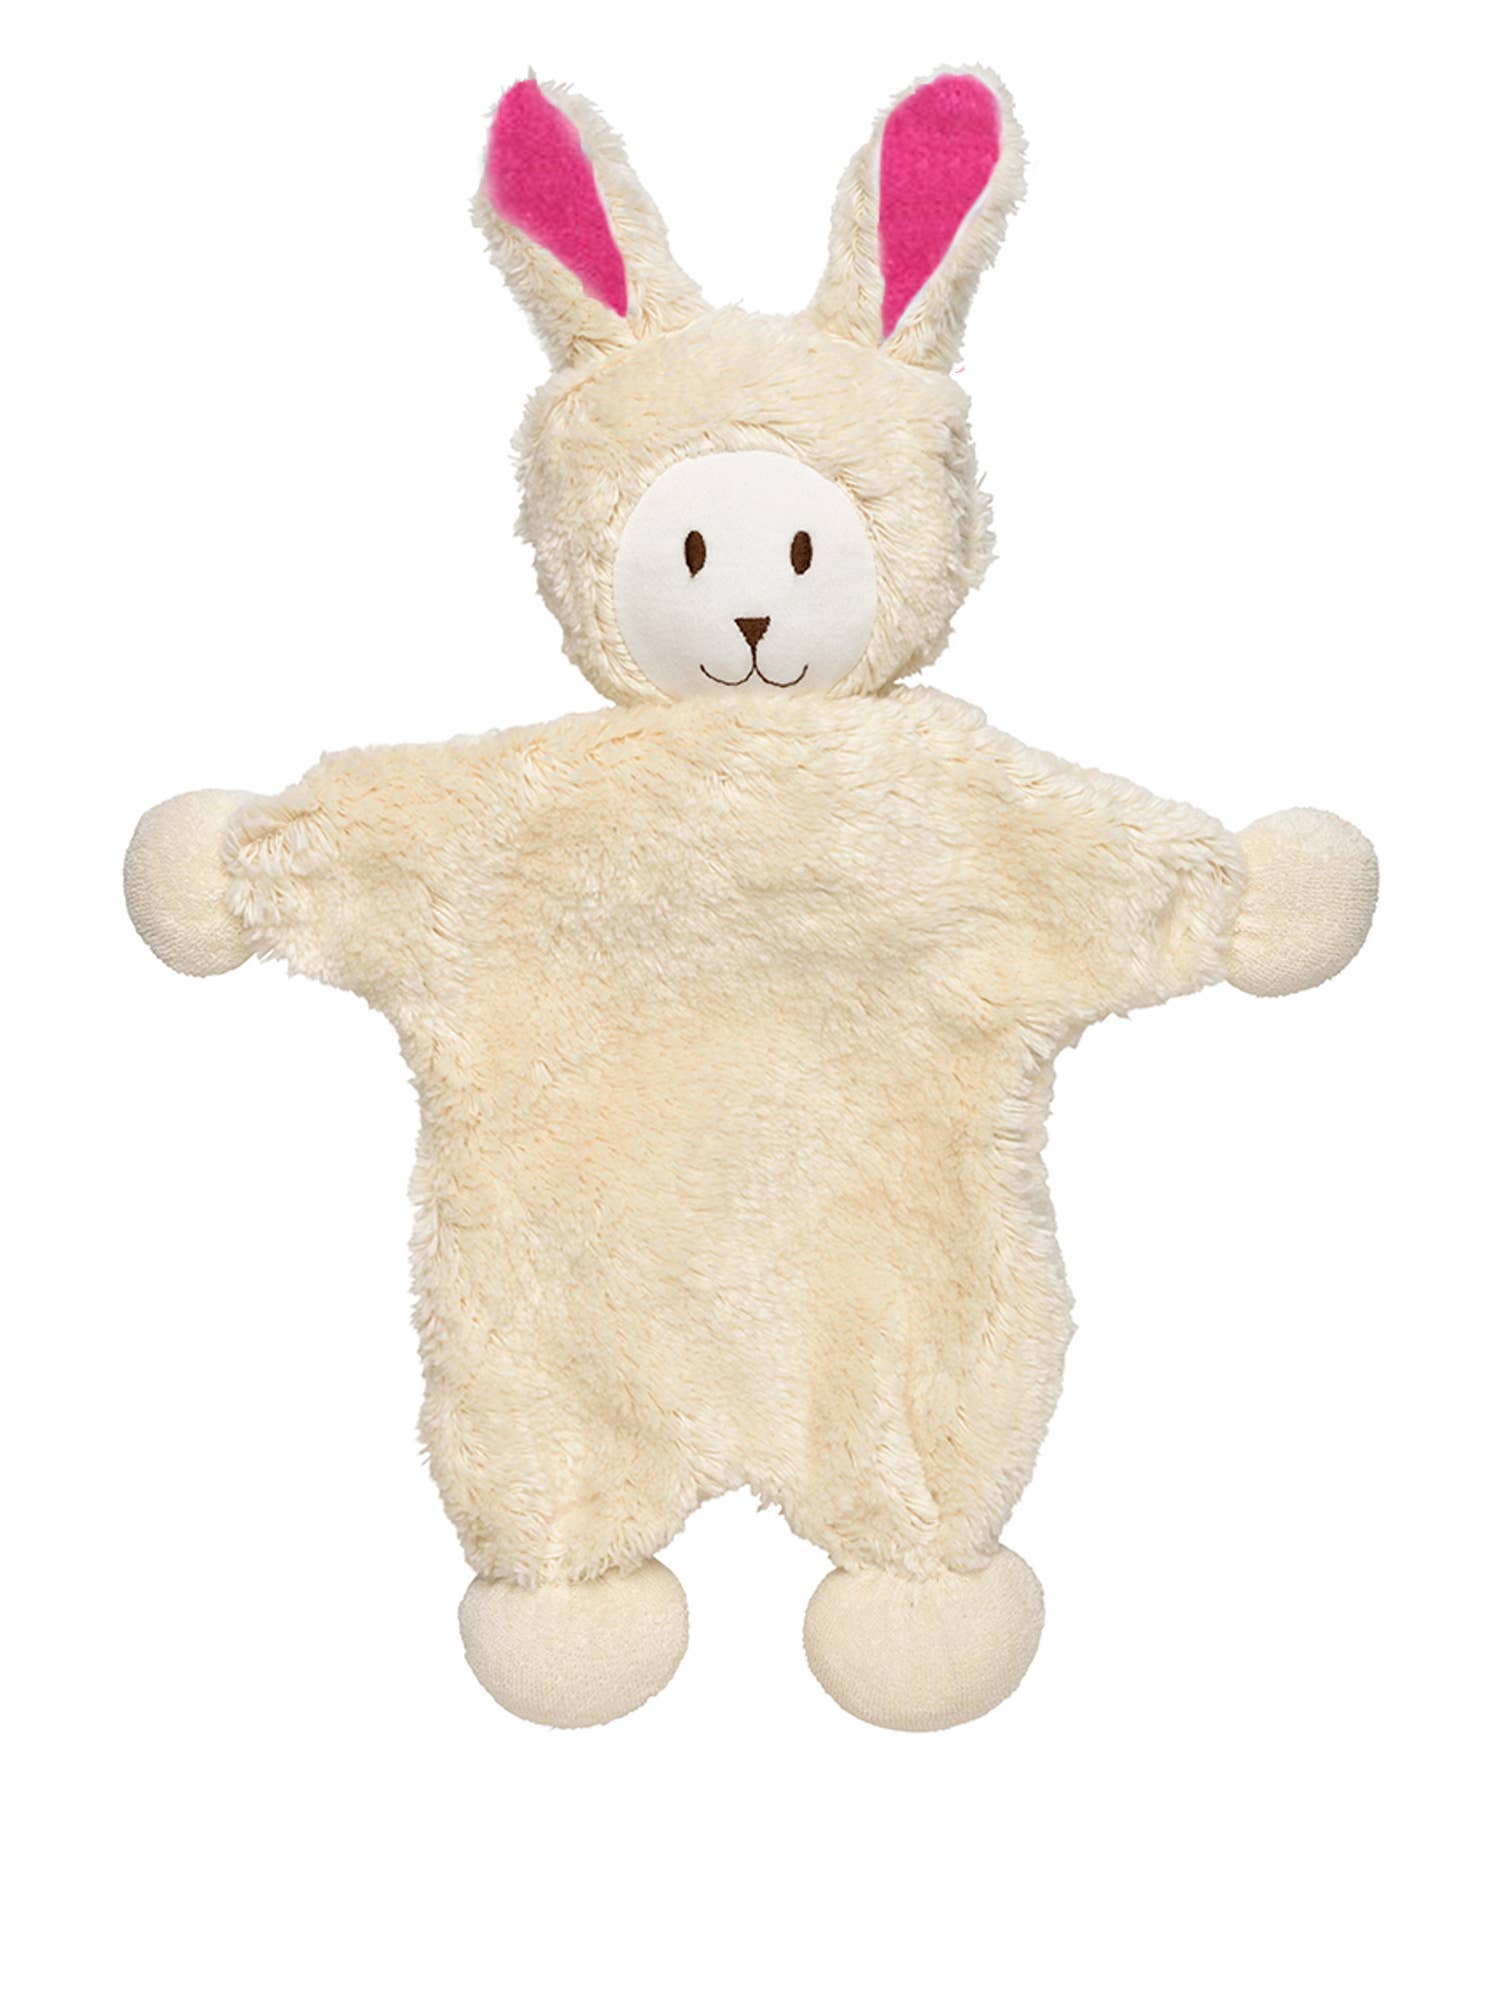 Snuggle Bunny Toy - Fuchsia Pink Ears - Organic Boutique